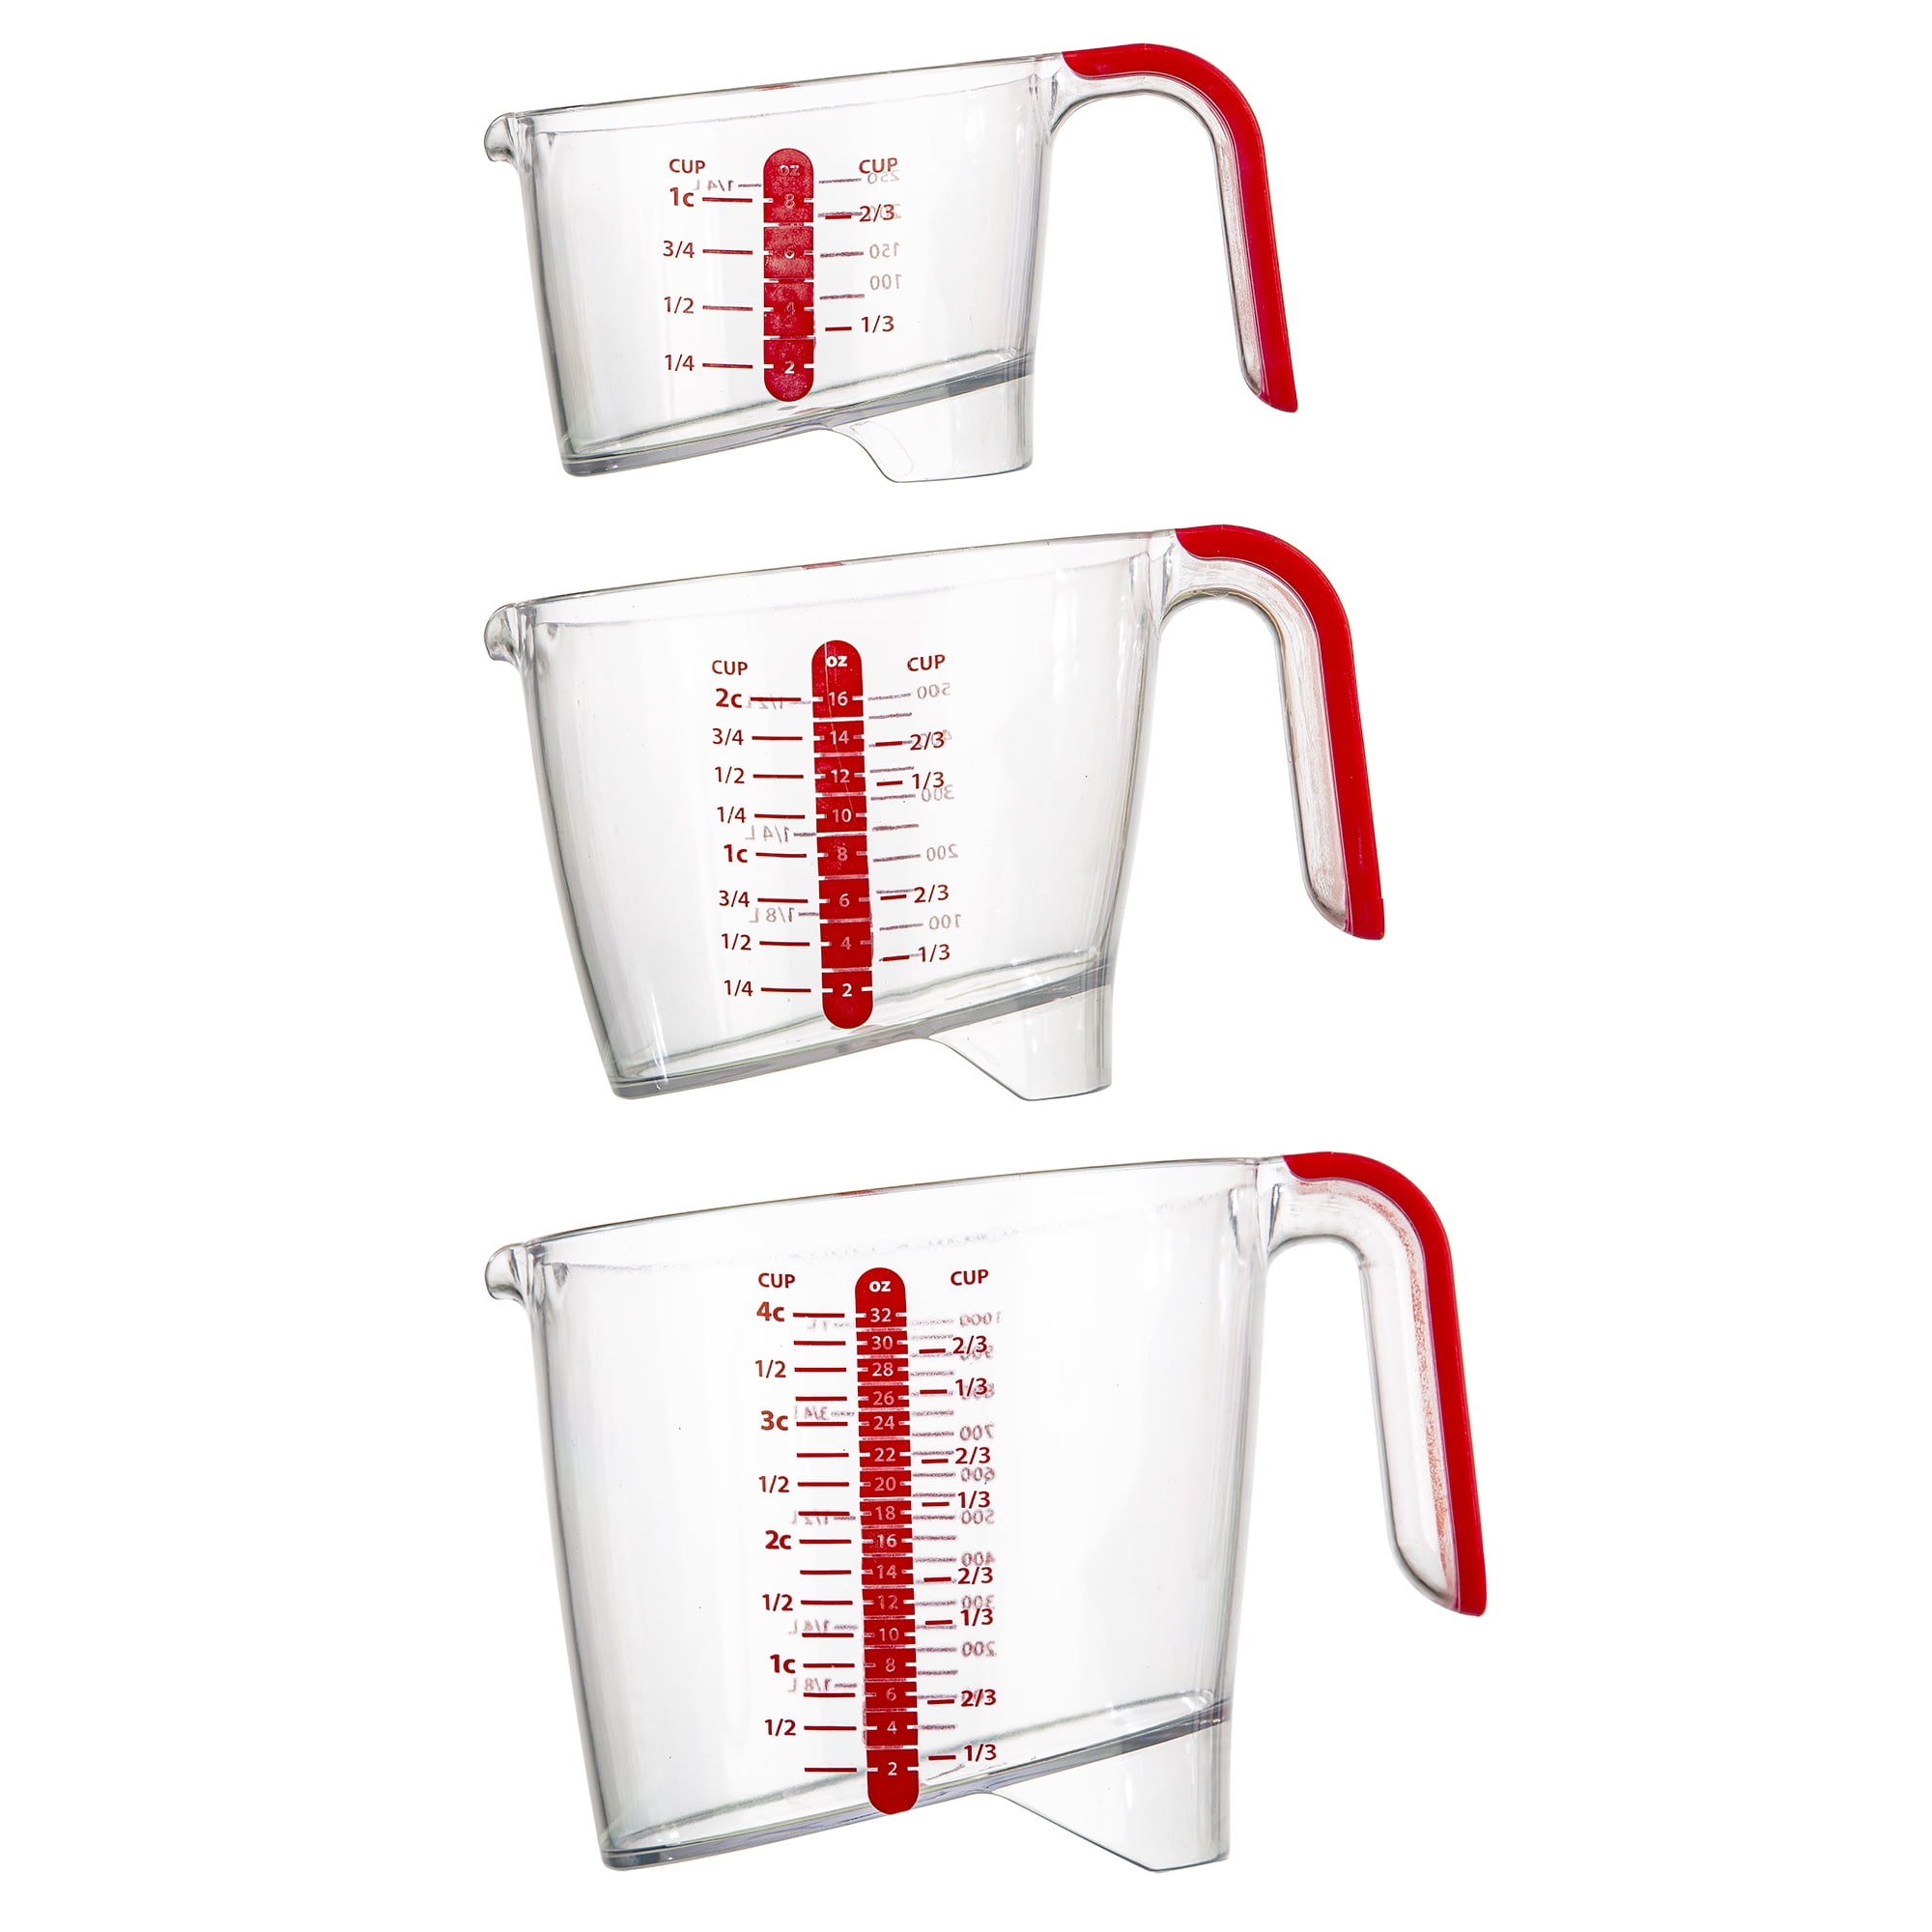 2x 1000ml Funnel Pitcher_For Measuring Easy Pour Measuring Cup Funnel Spout HQ 